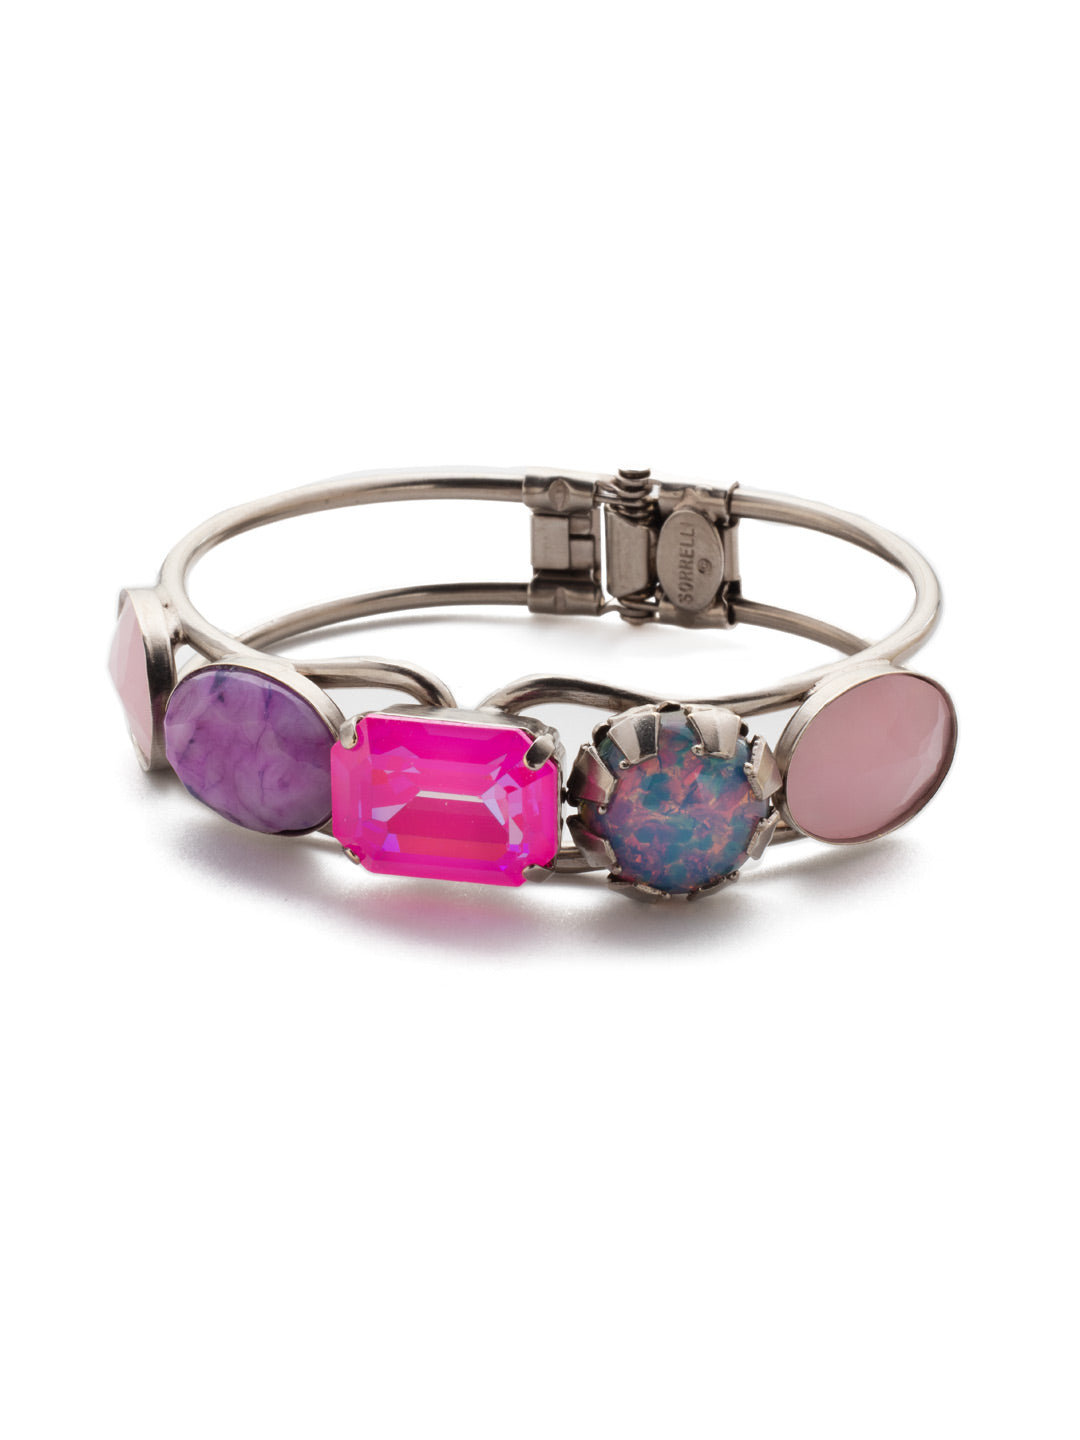 Bianca Cuff Bracelet - BET57ASETP - Our Bianca Cuff Bracelet makes a big statement with standout stones featuring earth tones and sparkle too, set on an airy double-linked metal band. From Sorrelli's Electric Pink collection in our Antique Silver-tone finish.